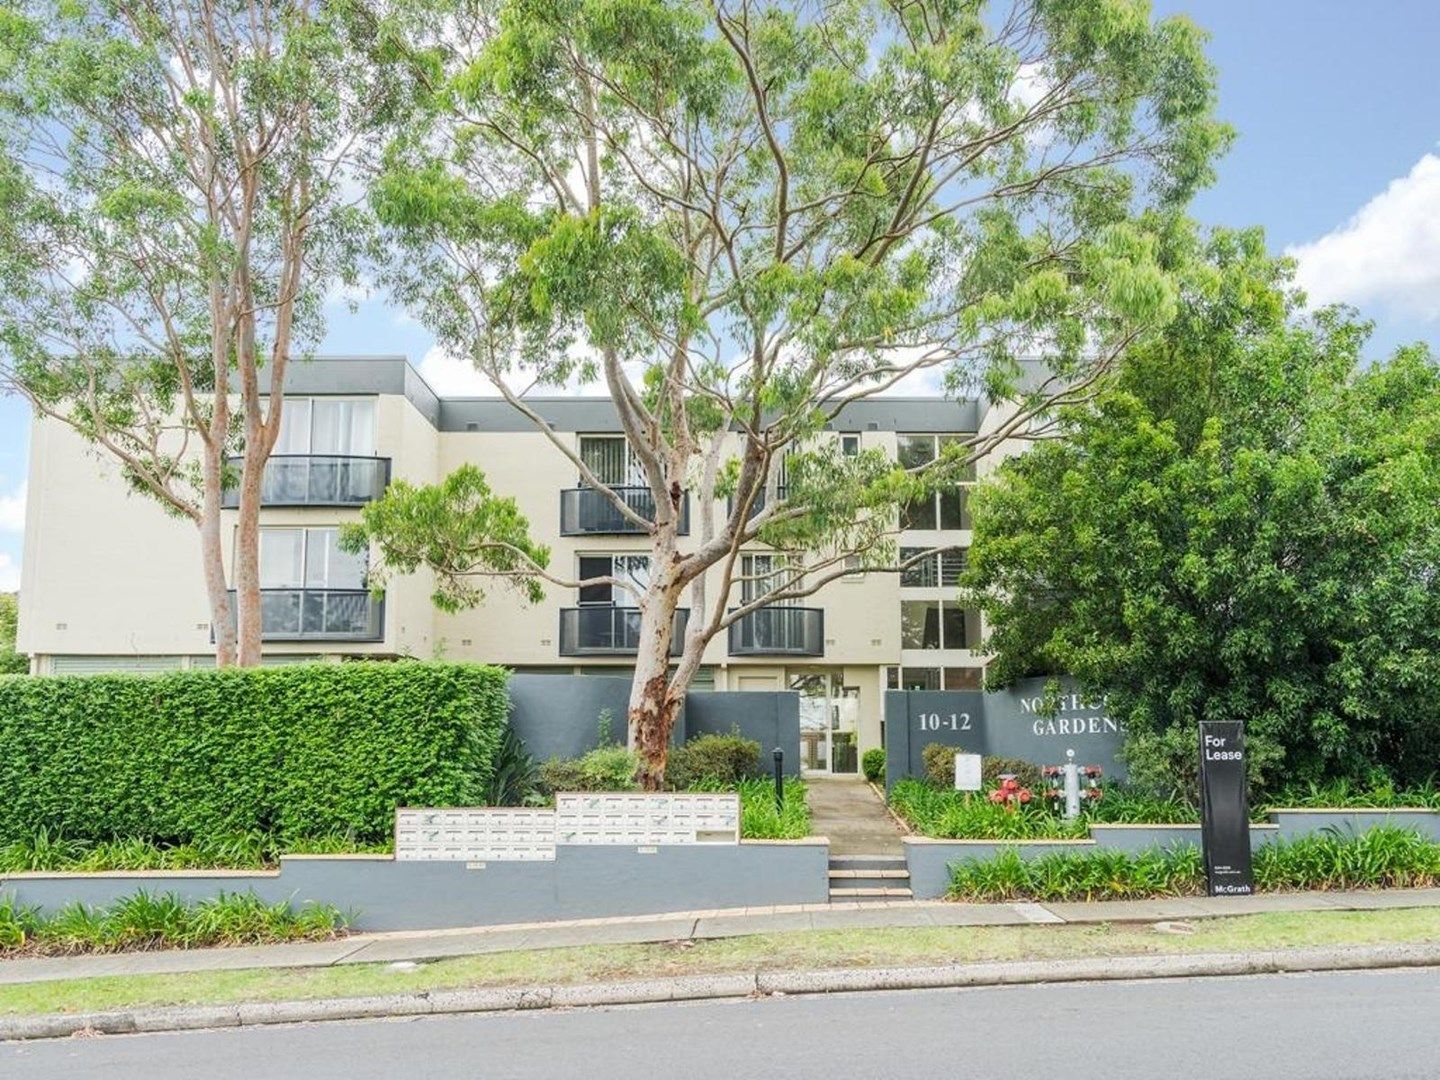 14/10 Northcote Road, Hornsby NSW 2077, Image 0